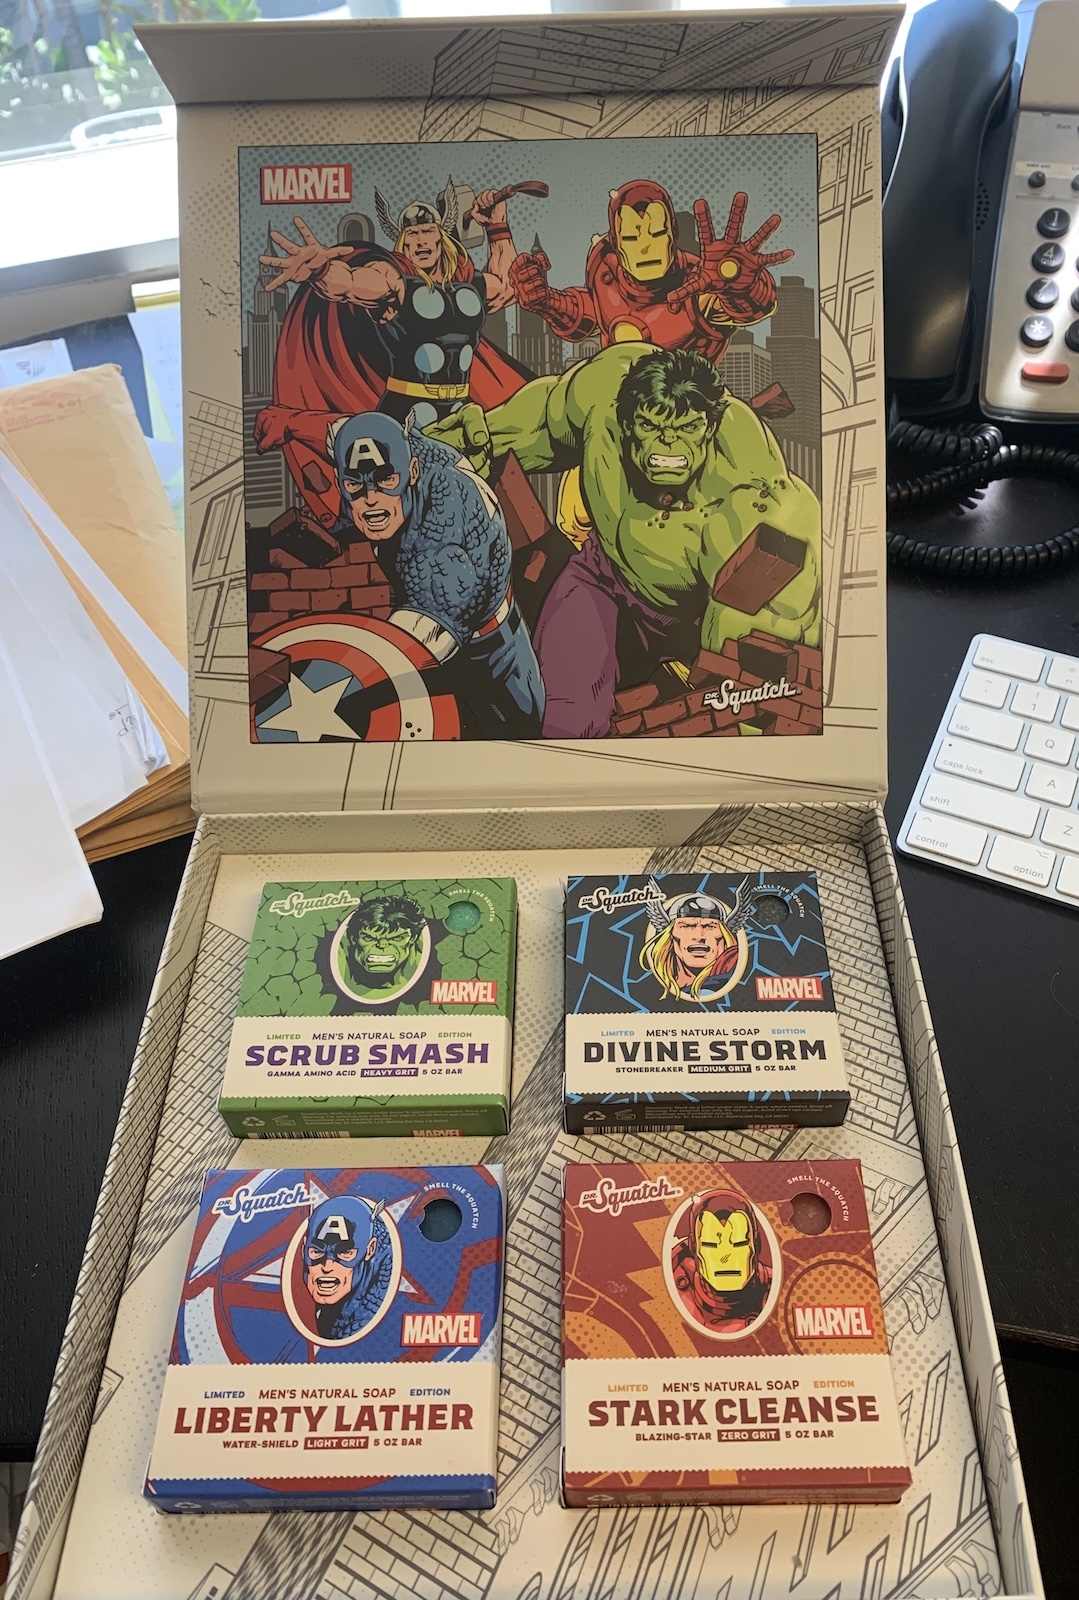 Dr. Squatch Soap Avengers Collection with  